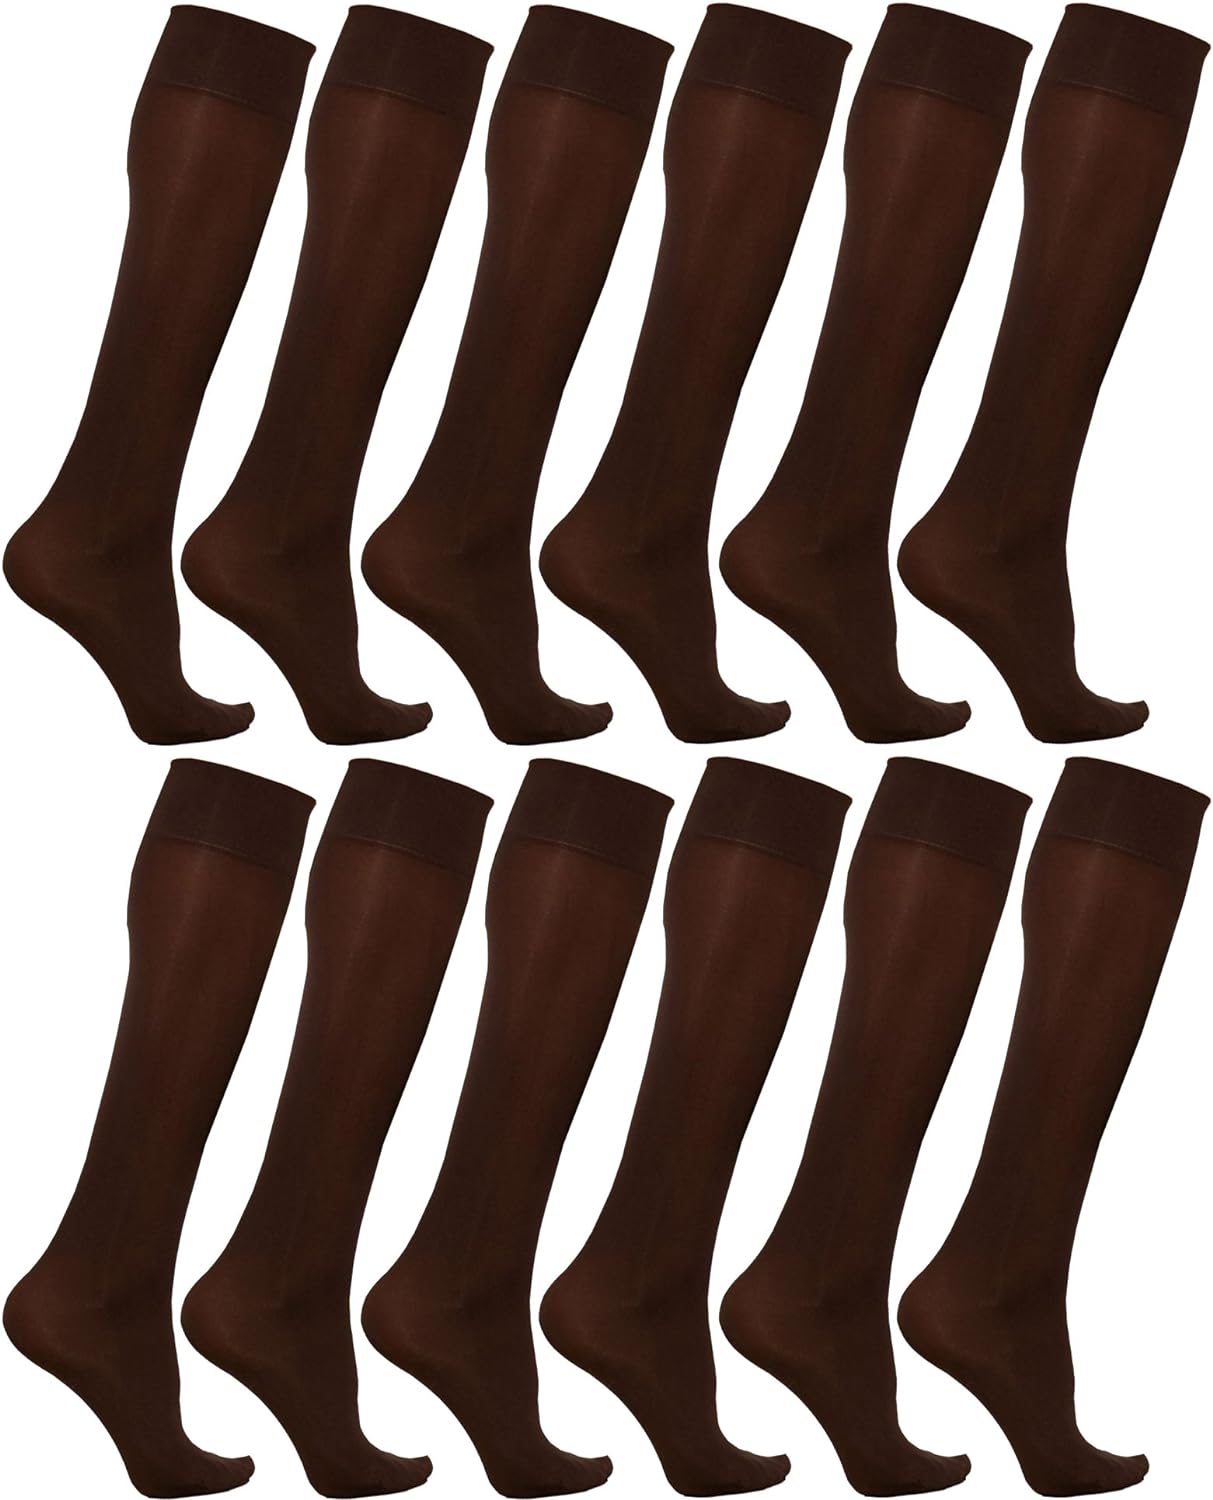 Buy Queen Size Trouser Socks for Women, 6 Pairs Plus Stretchy Opaque Knee  High Dress Sock (6 Pairs - Assorted #1) at Amazon.in